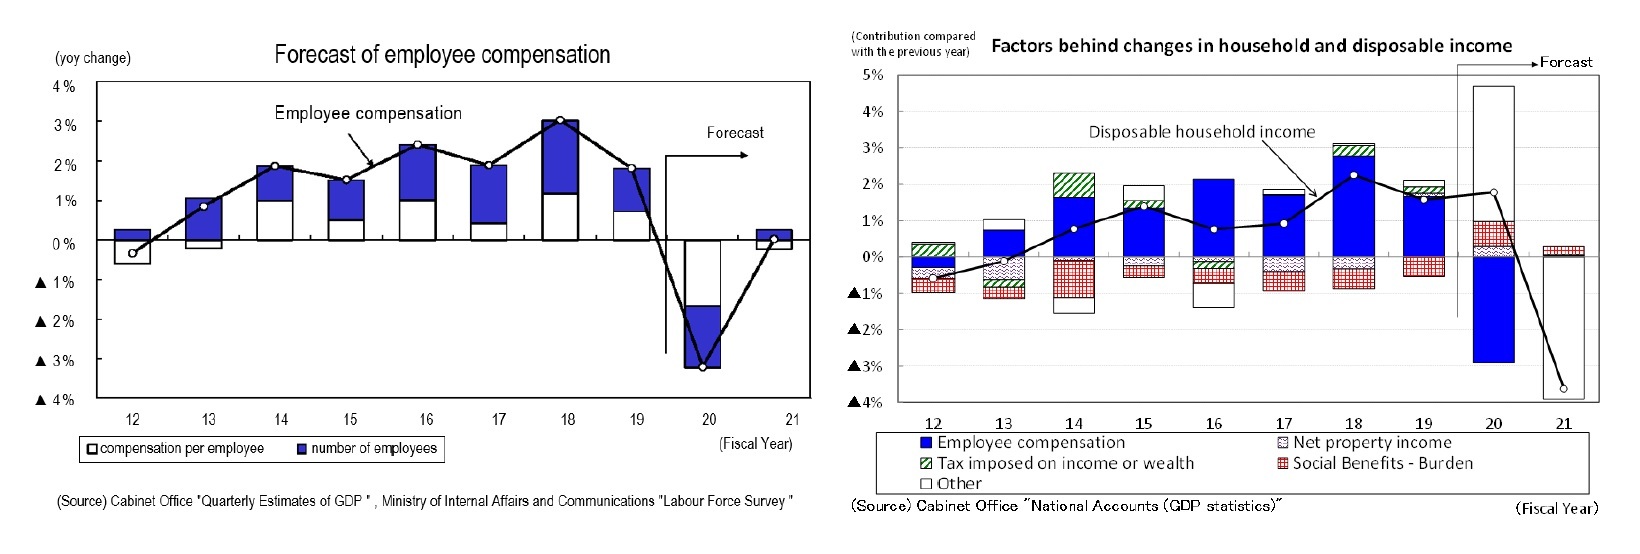 Forecast of employee compensation/Factors behind changes in household disposable income